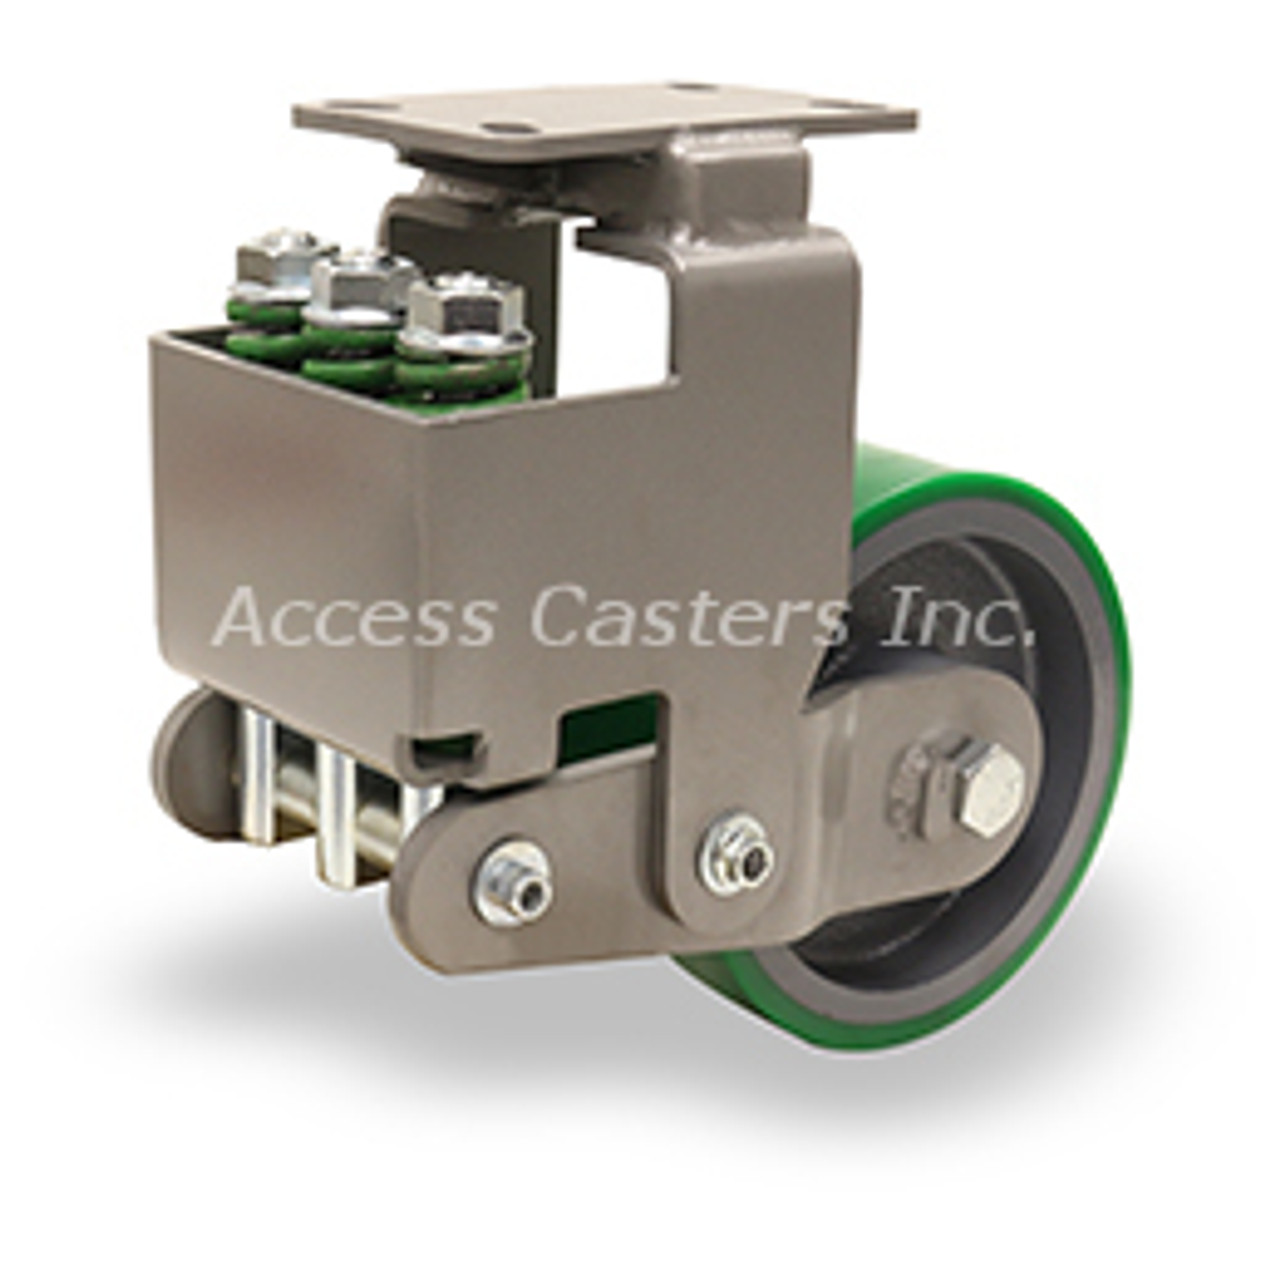 R-AEZFFM-83DB Spring loaded caster with 8" x 3" Duralast wheel